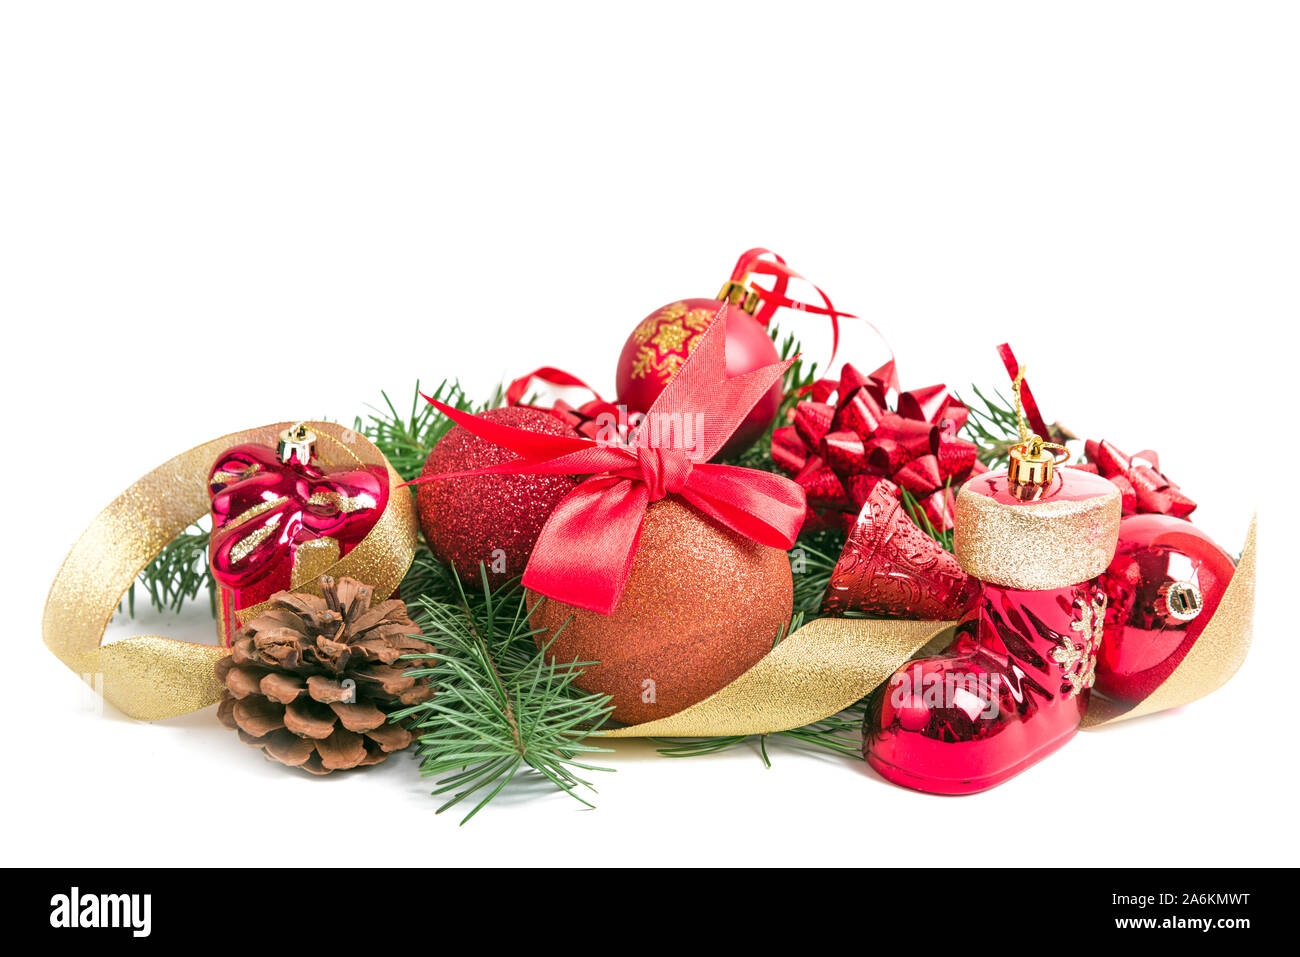 Christmas decoration bauble, pine cone, gift shoe and other holiday objects on a white background Stock Photo